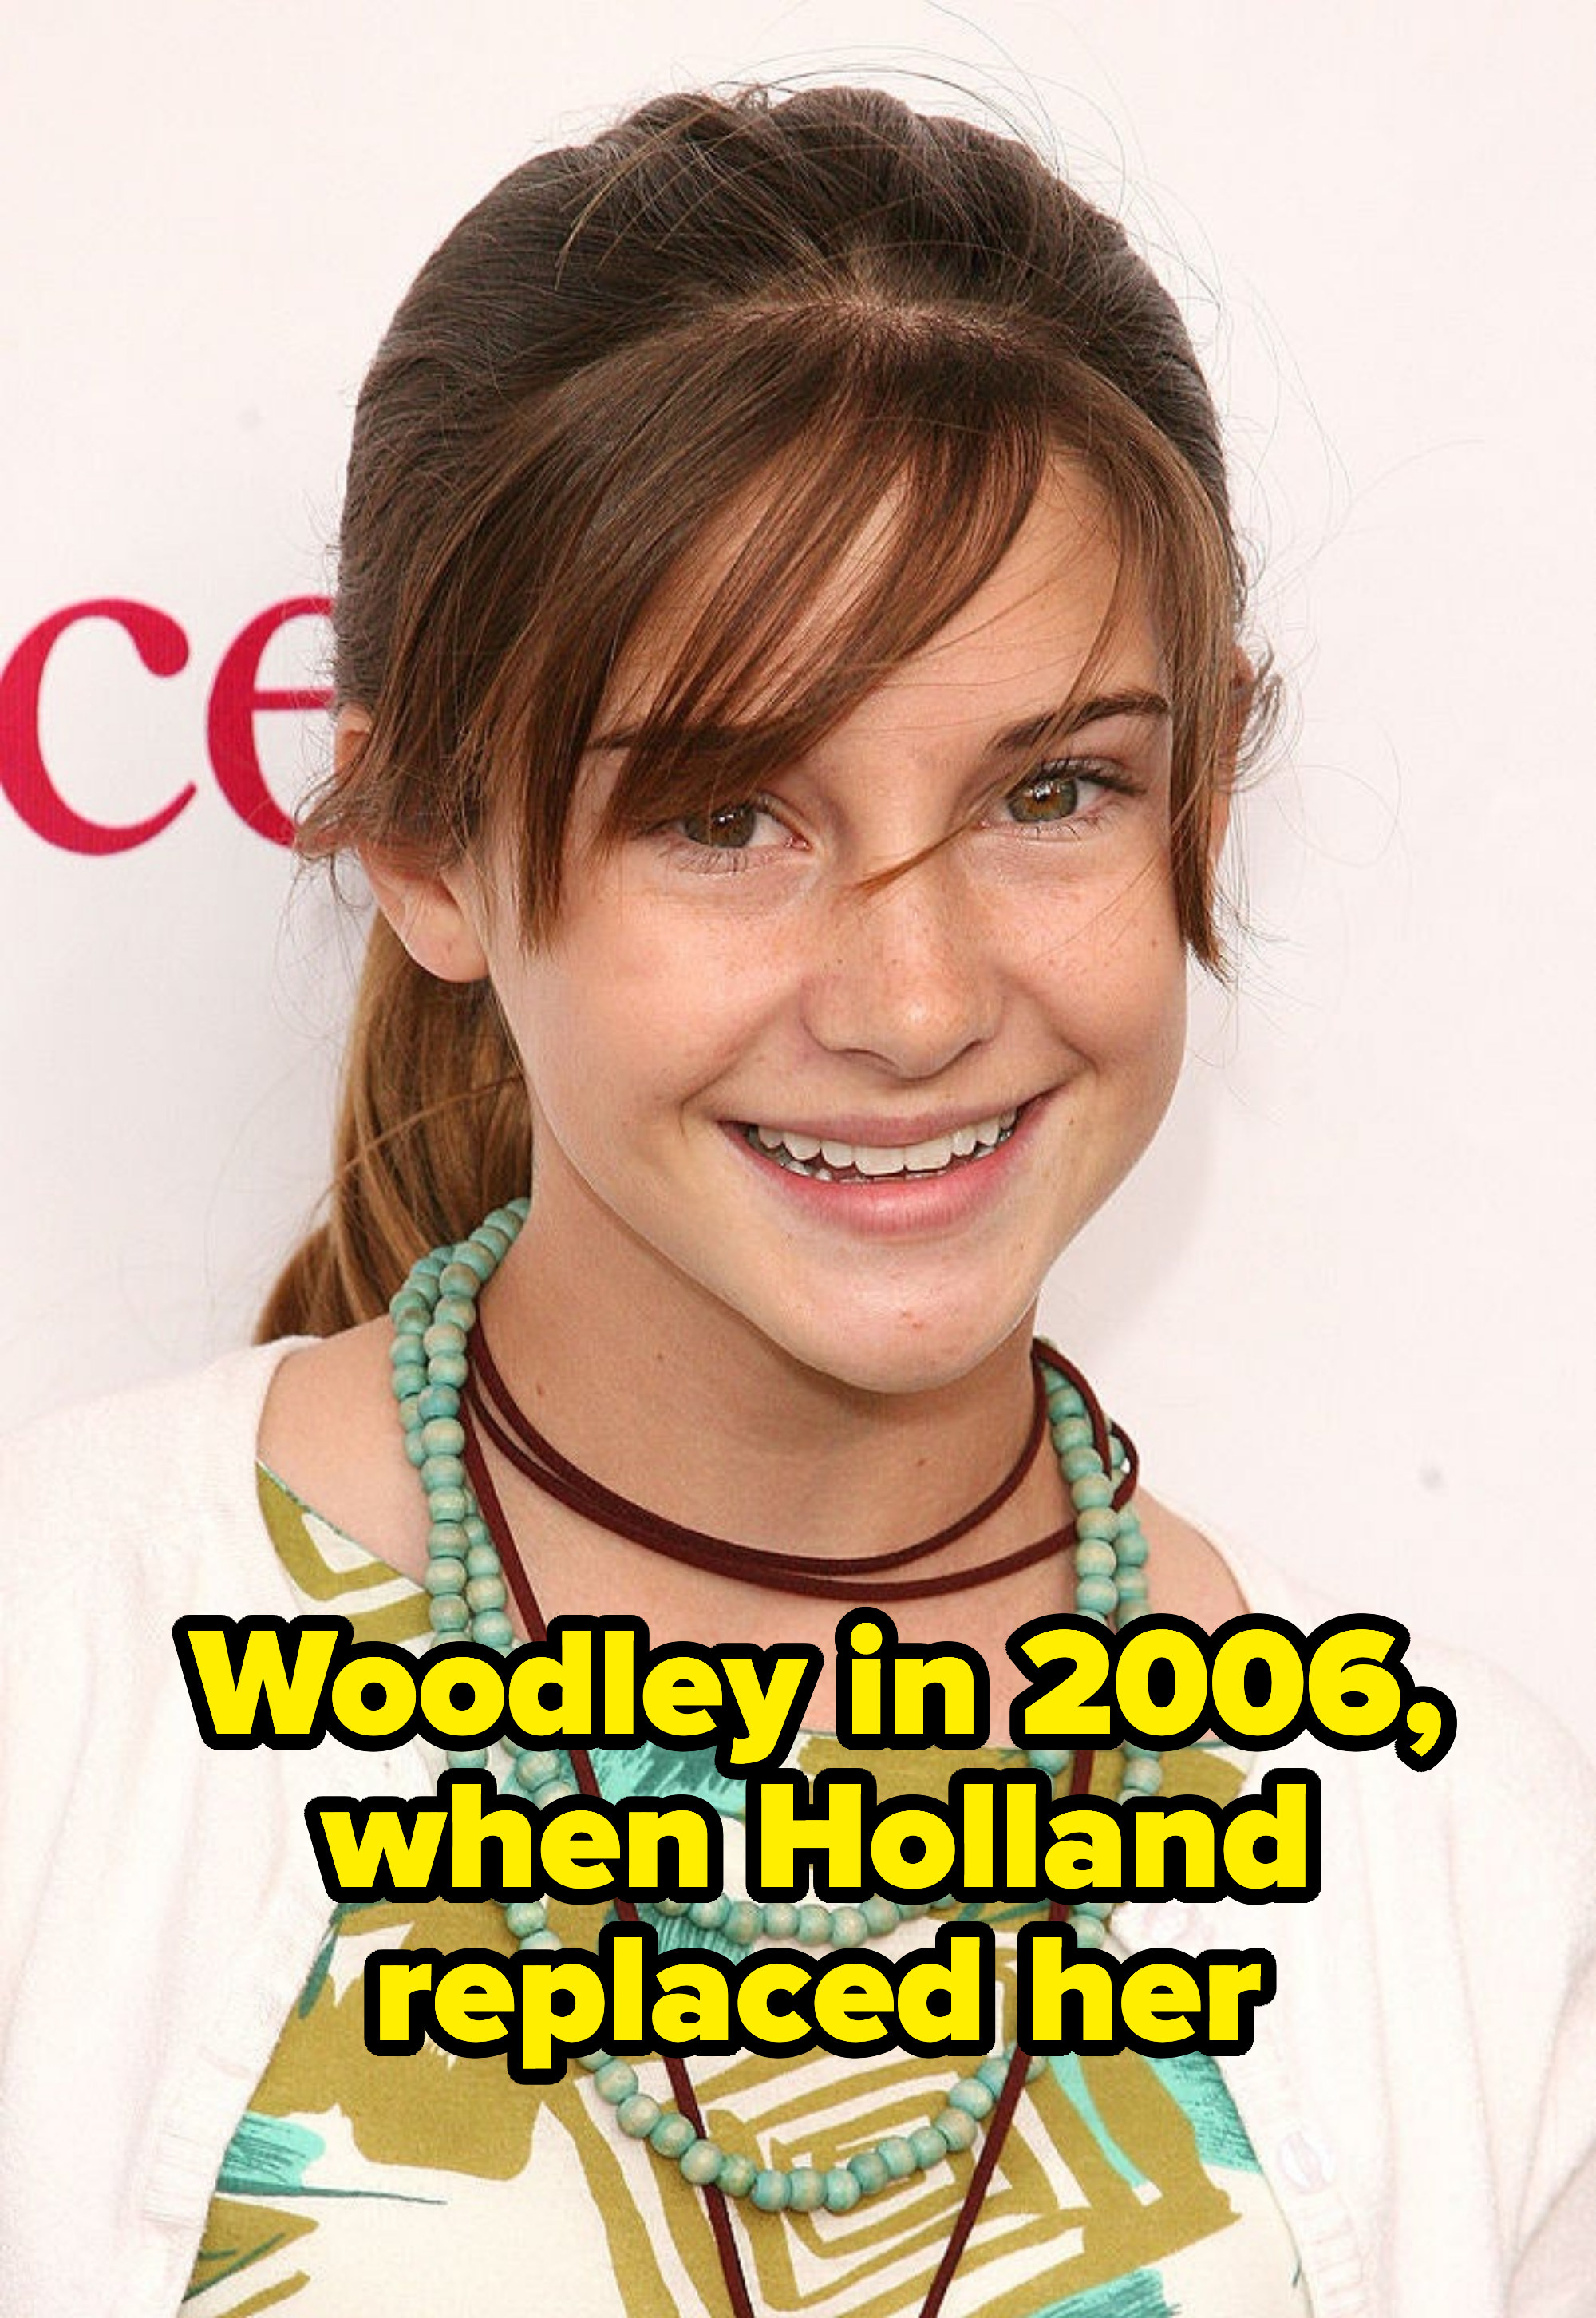 Woodley in 2006, when Holland replaced her